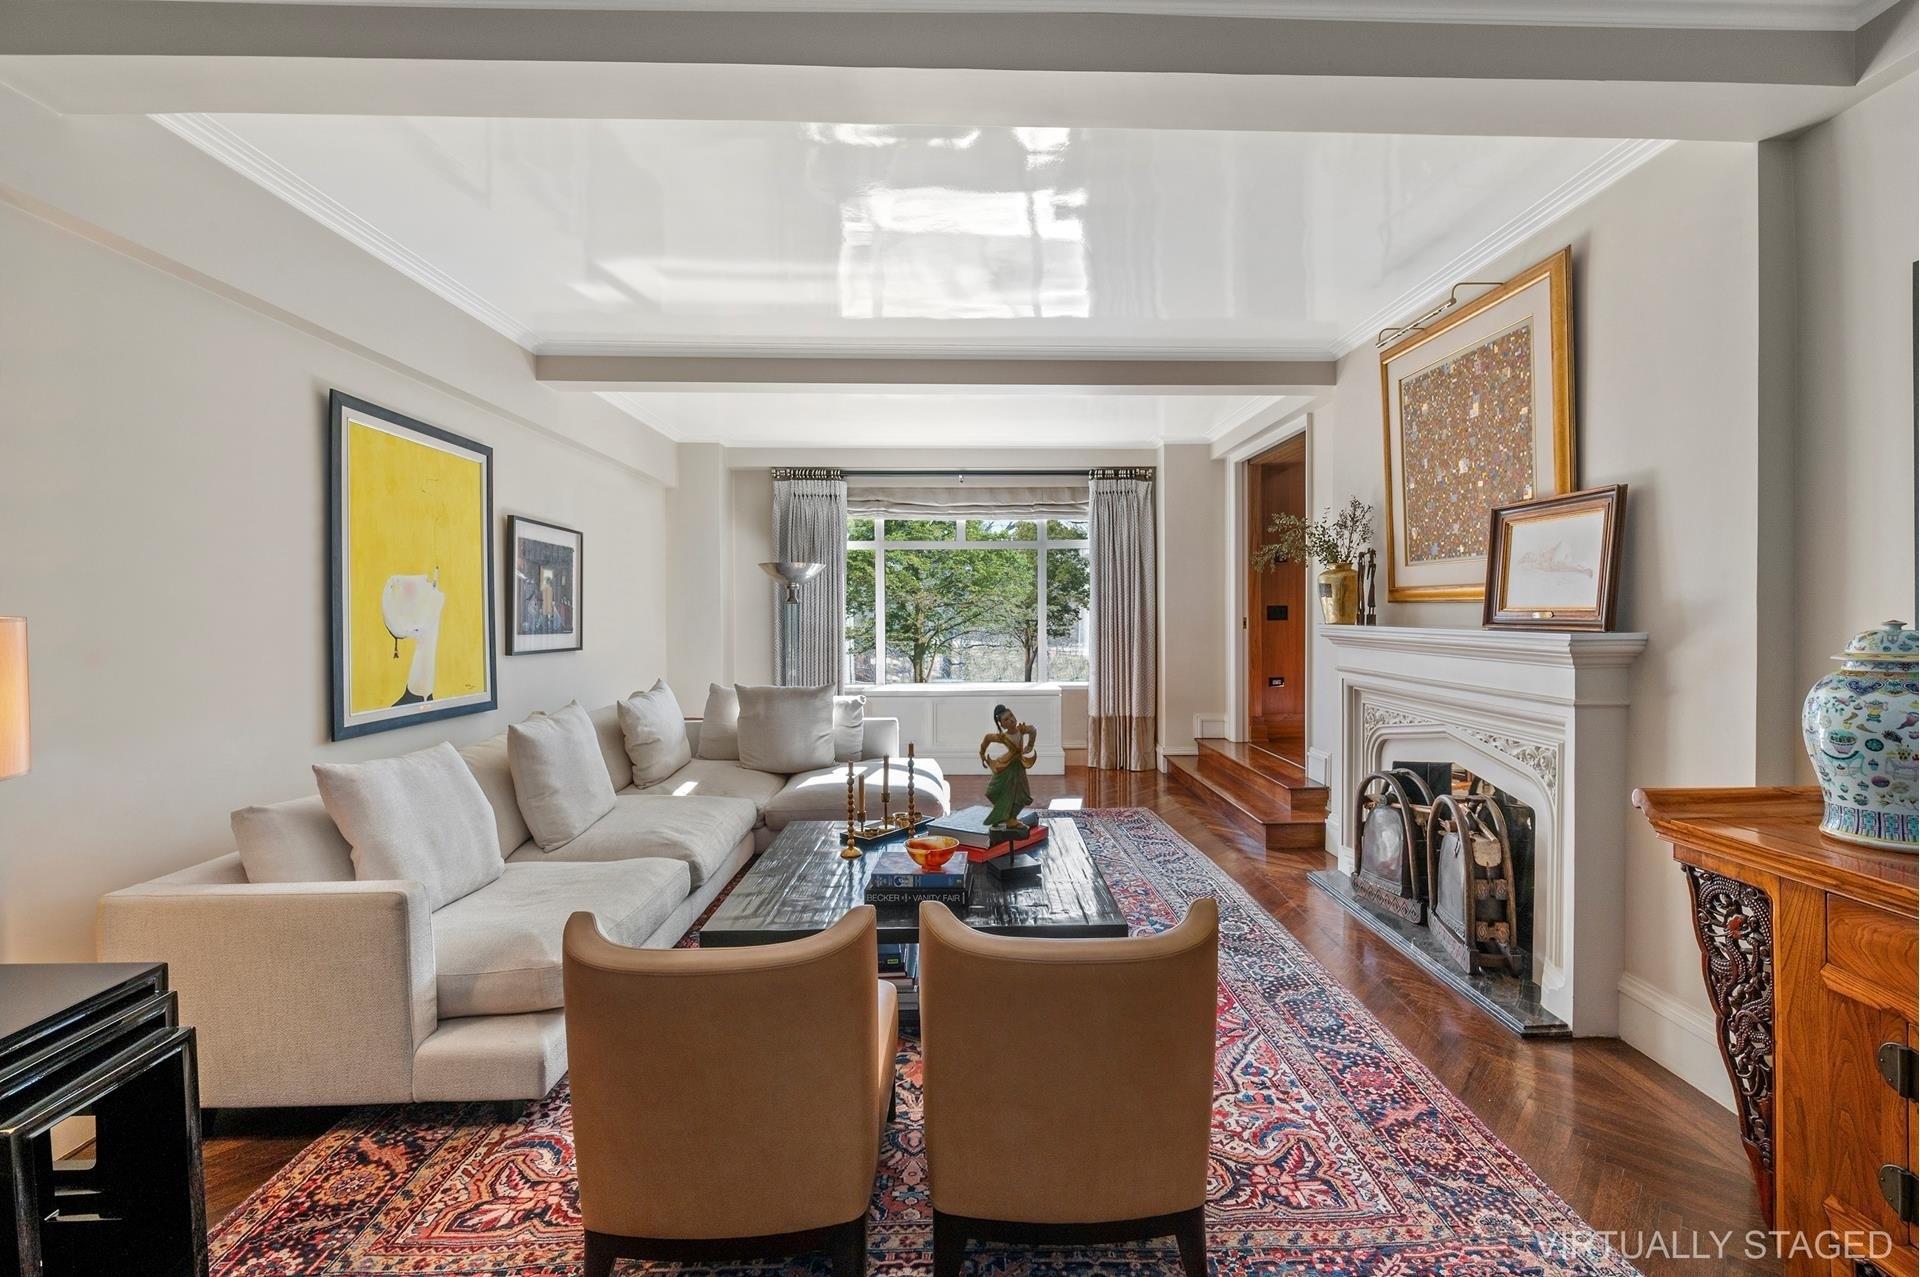 Co-op Properties for Sale at 55 CENTRAL PARK W, 3F Lincoln Square, New York, New York 10023